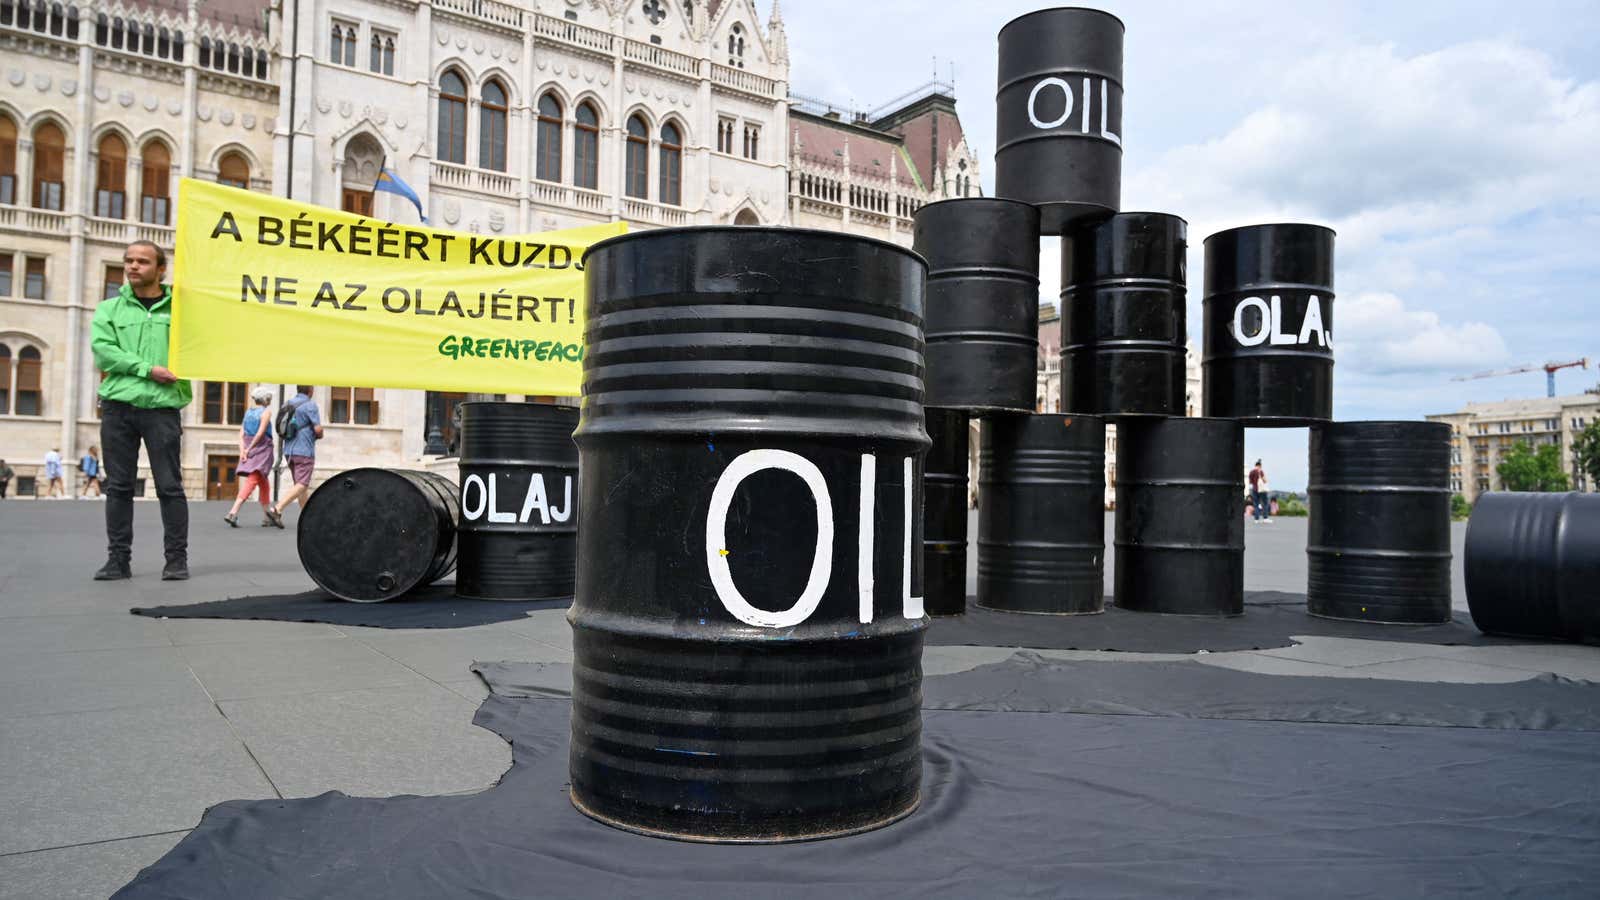 Oil barrels are seen during a protest action of independent global campaigning network Greenpeace in front of the parliament building in Budapest, Hungary on May 30, 2022